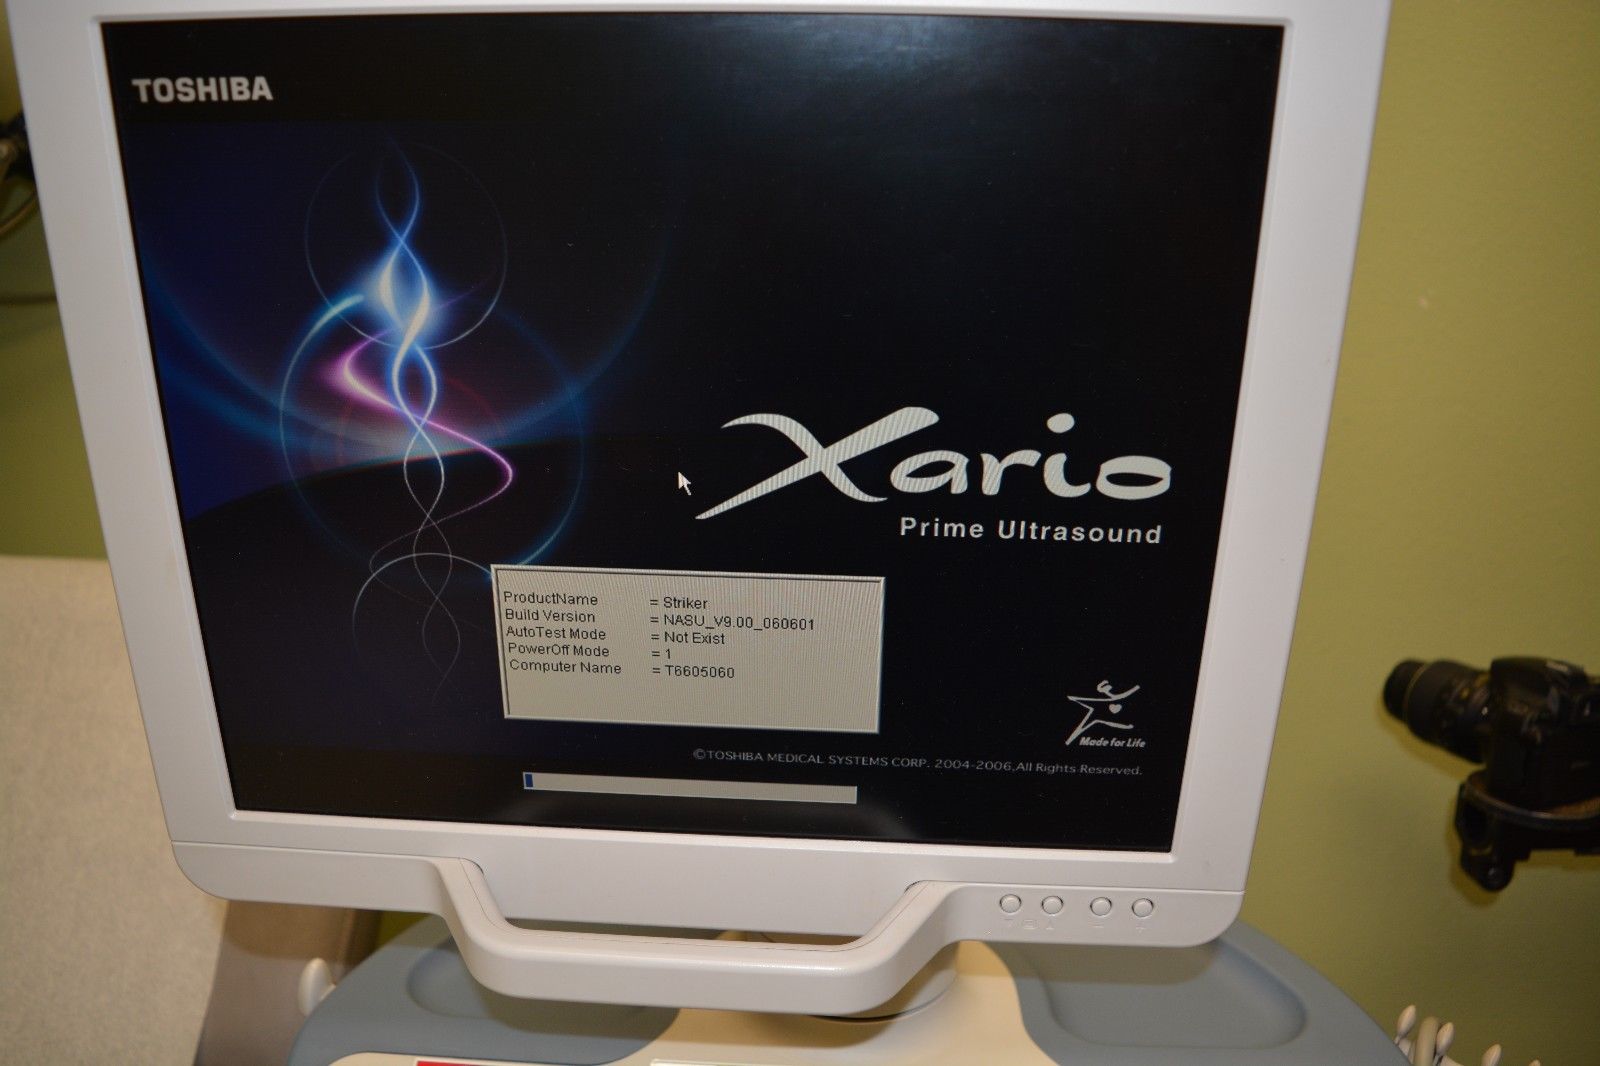 Toshiba Xario SSA-660A Ultrasound with THREE Probes – Excellent Condition!!! DIAGNOSTIC ULTRASOUND MACHINES FOR SALE